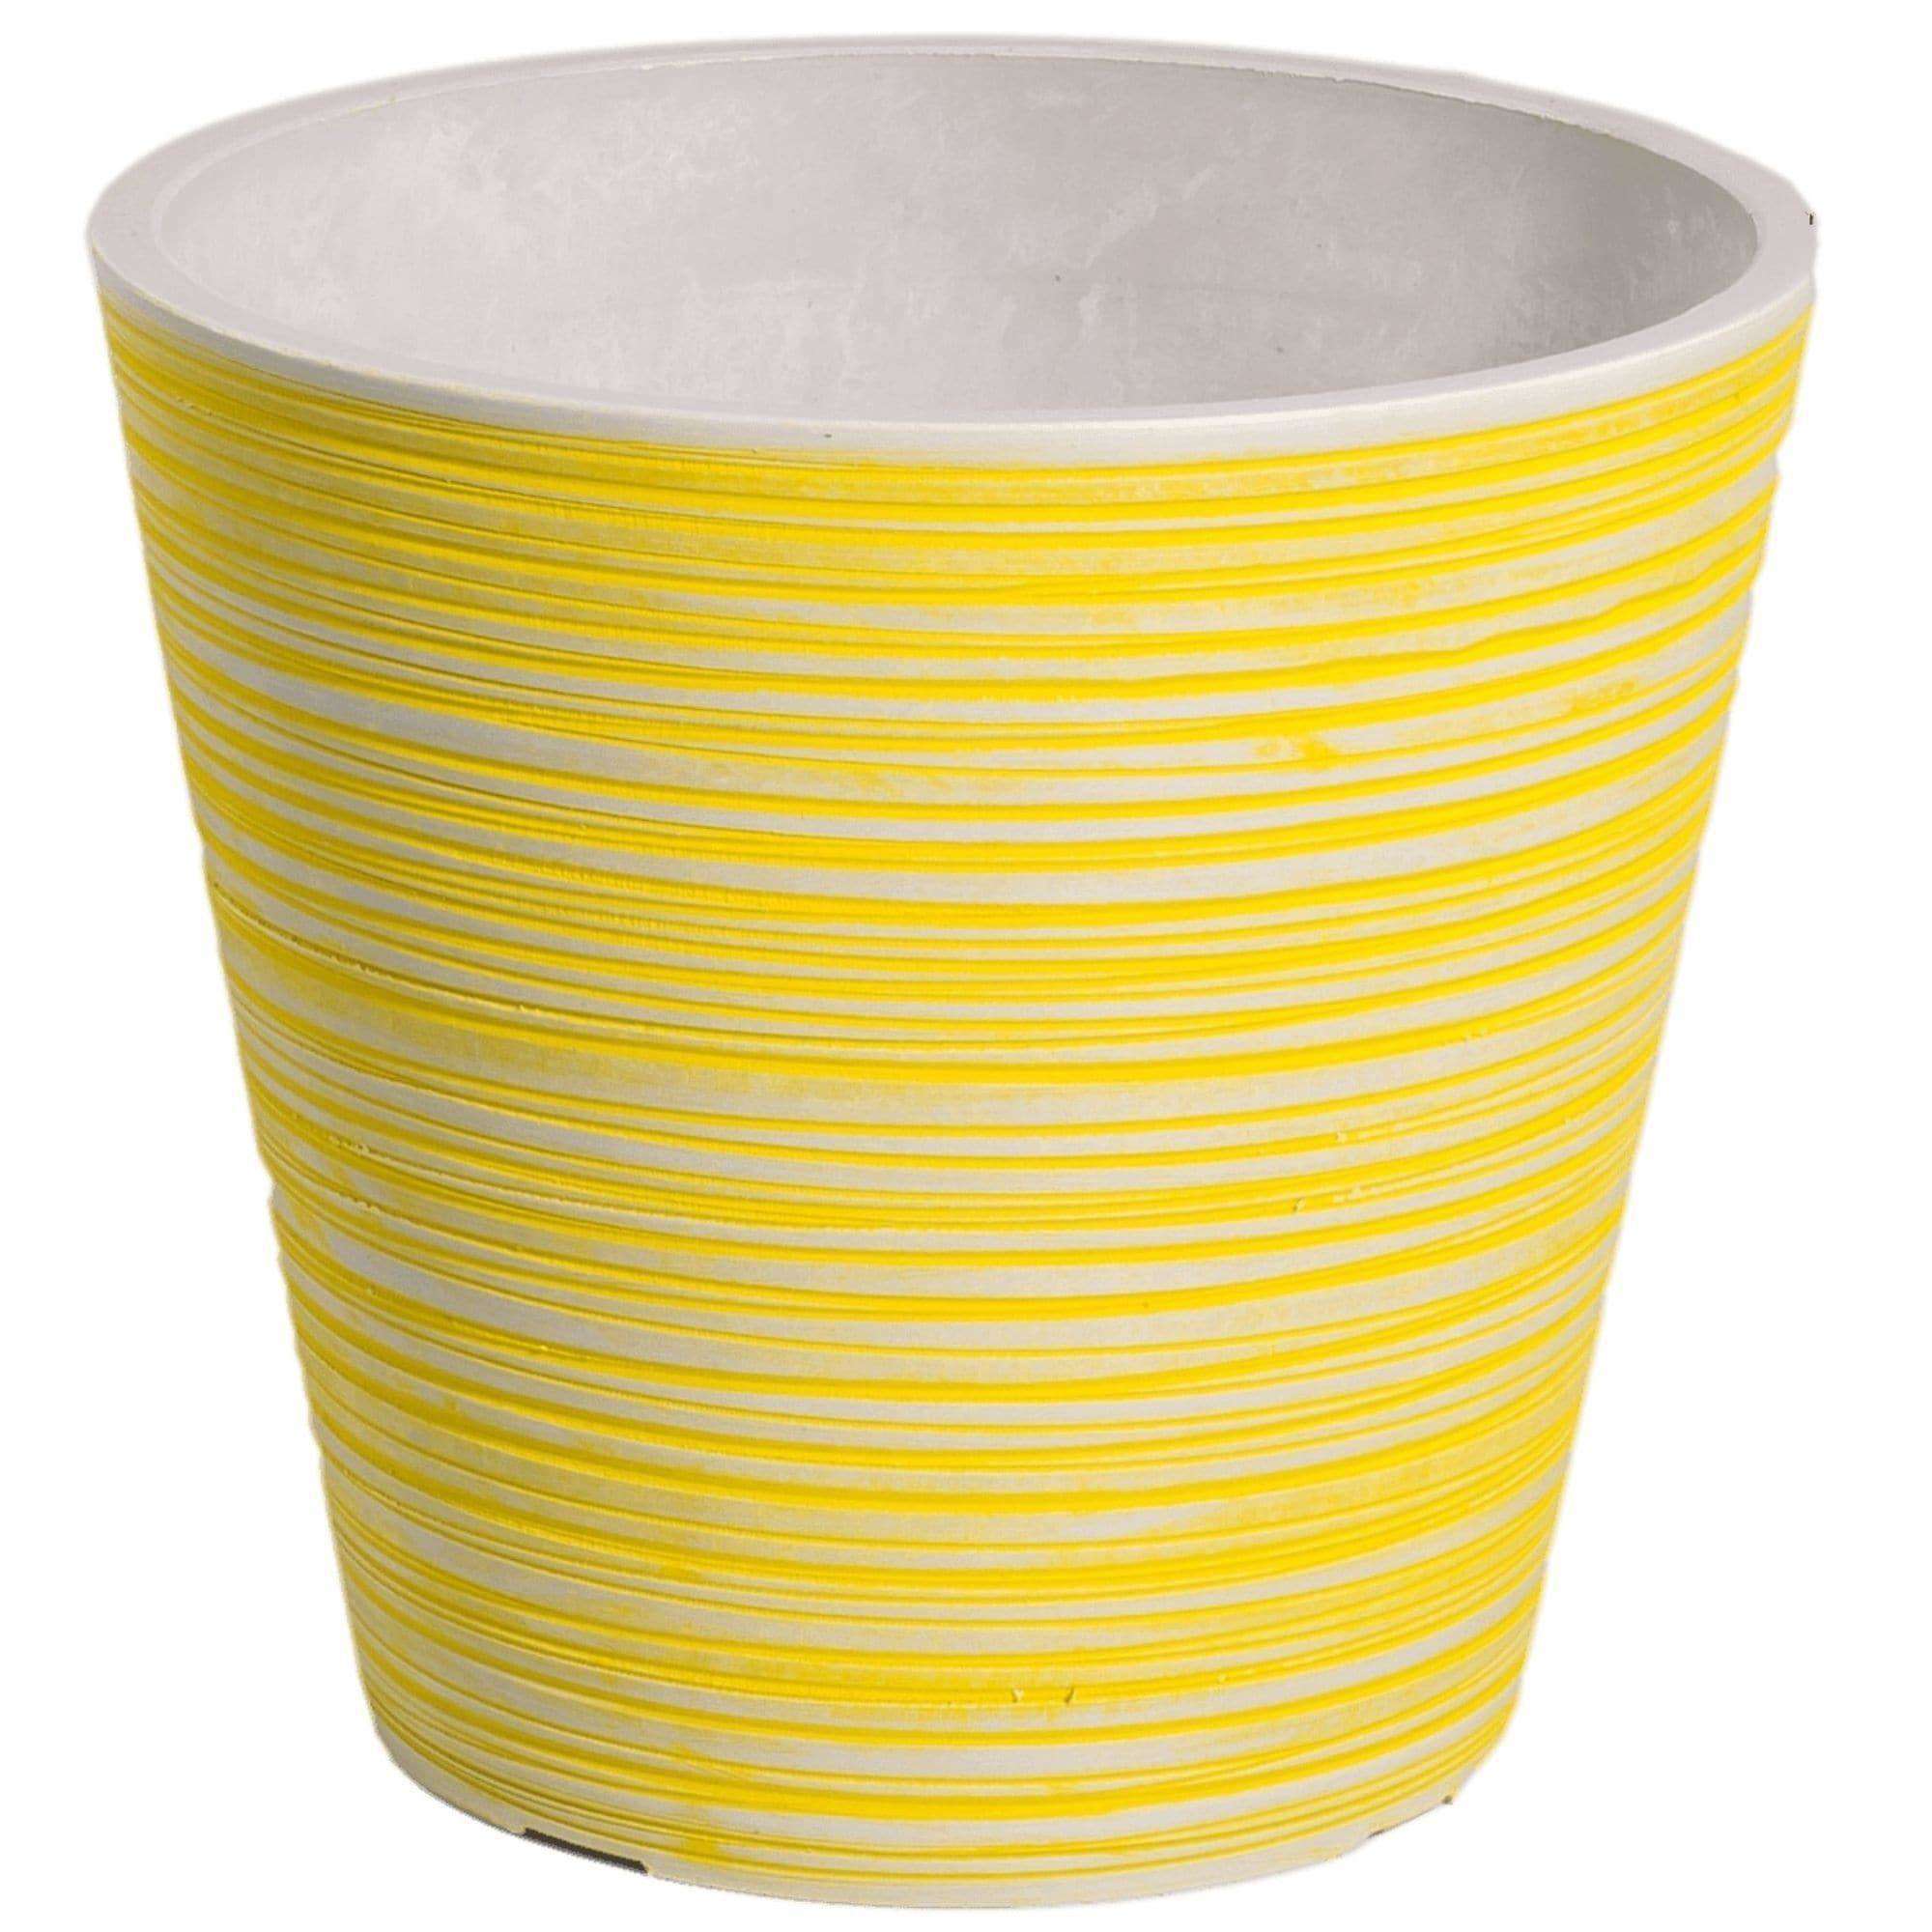 yellow-and-white-engraved-pot-17cm-713113.jpg